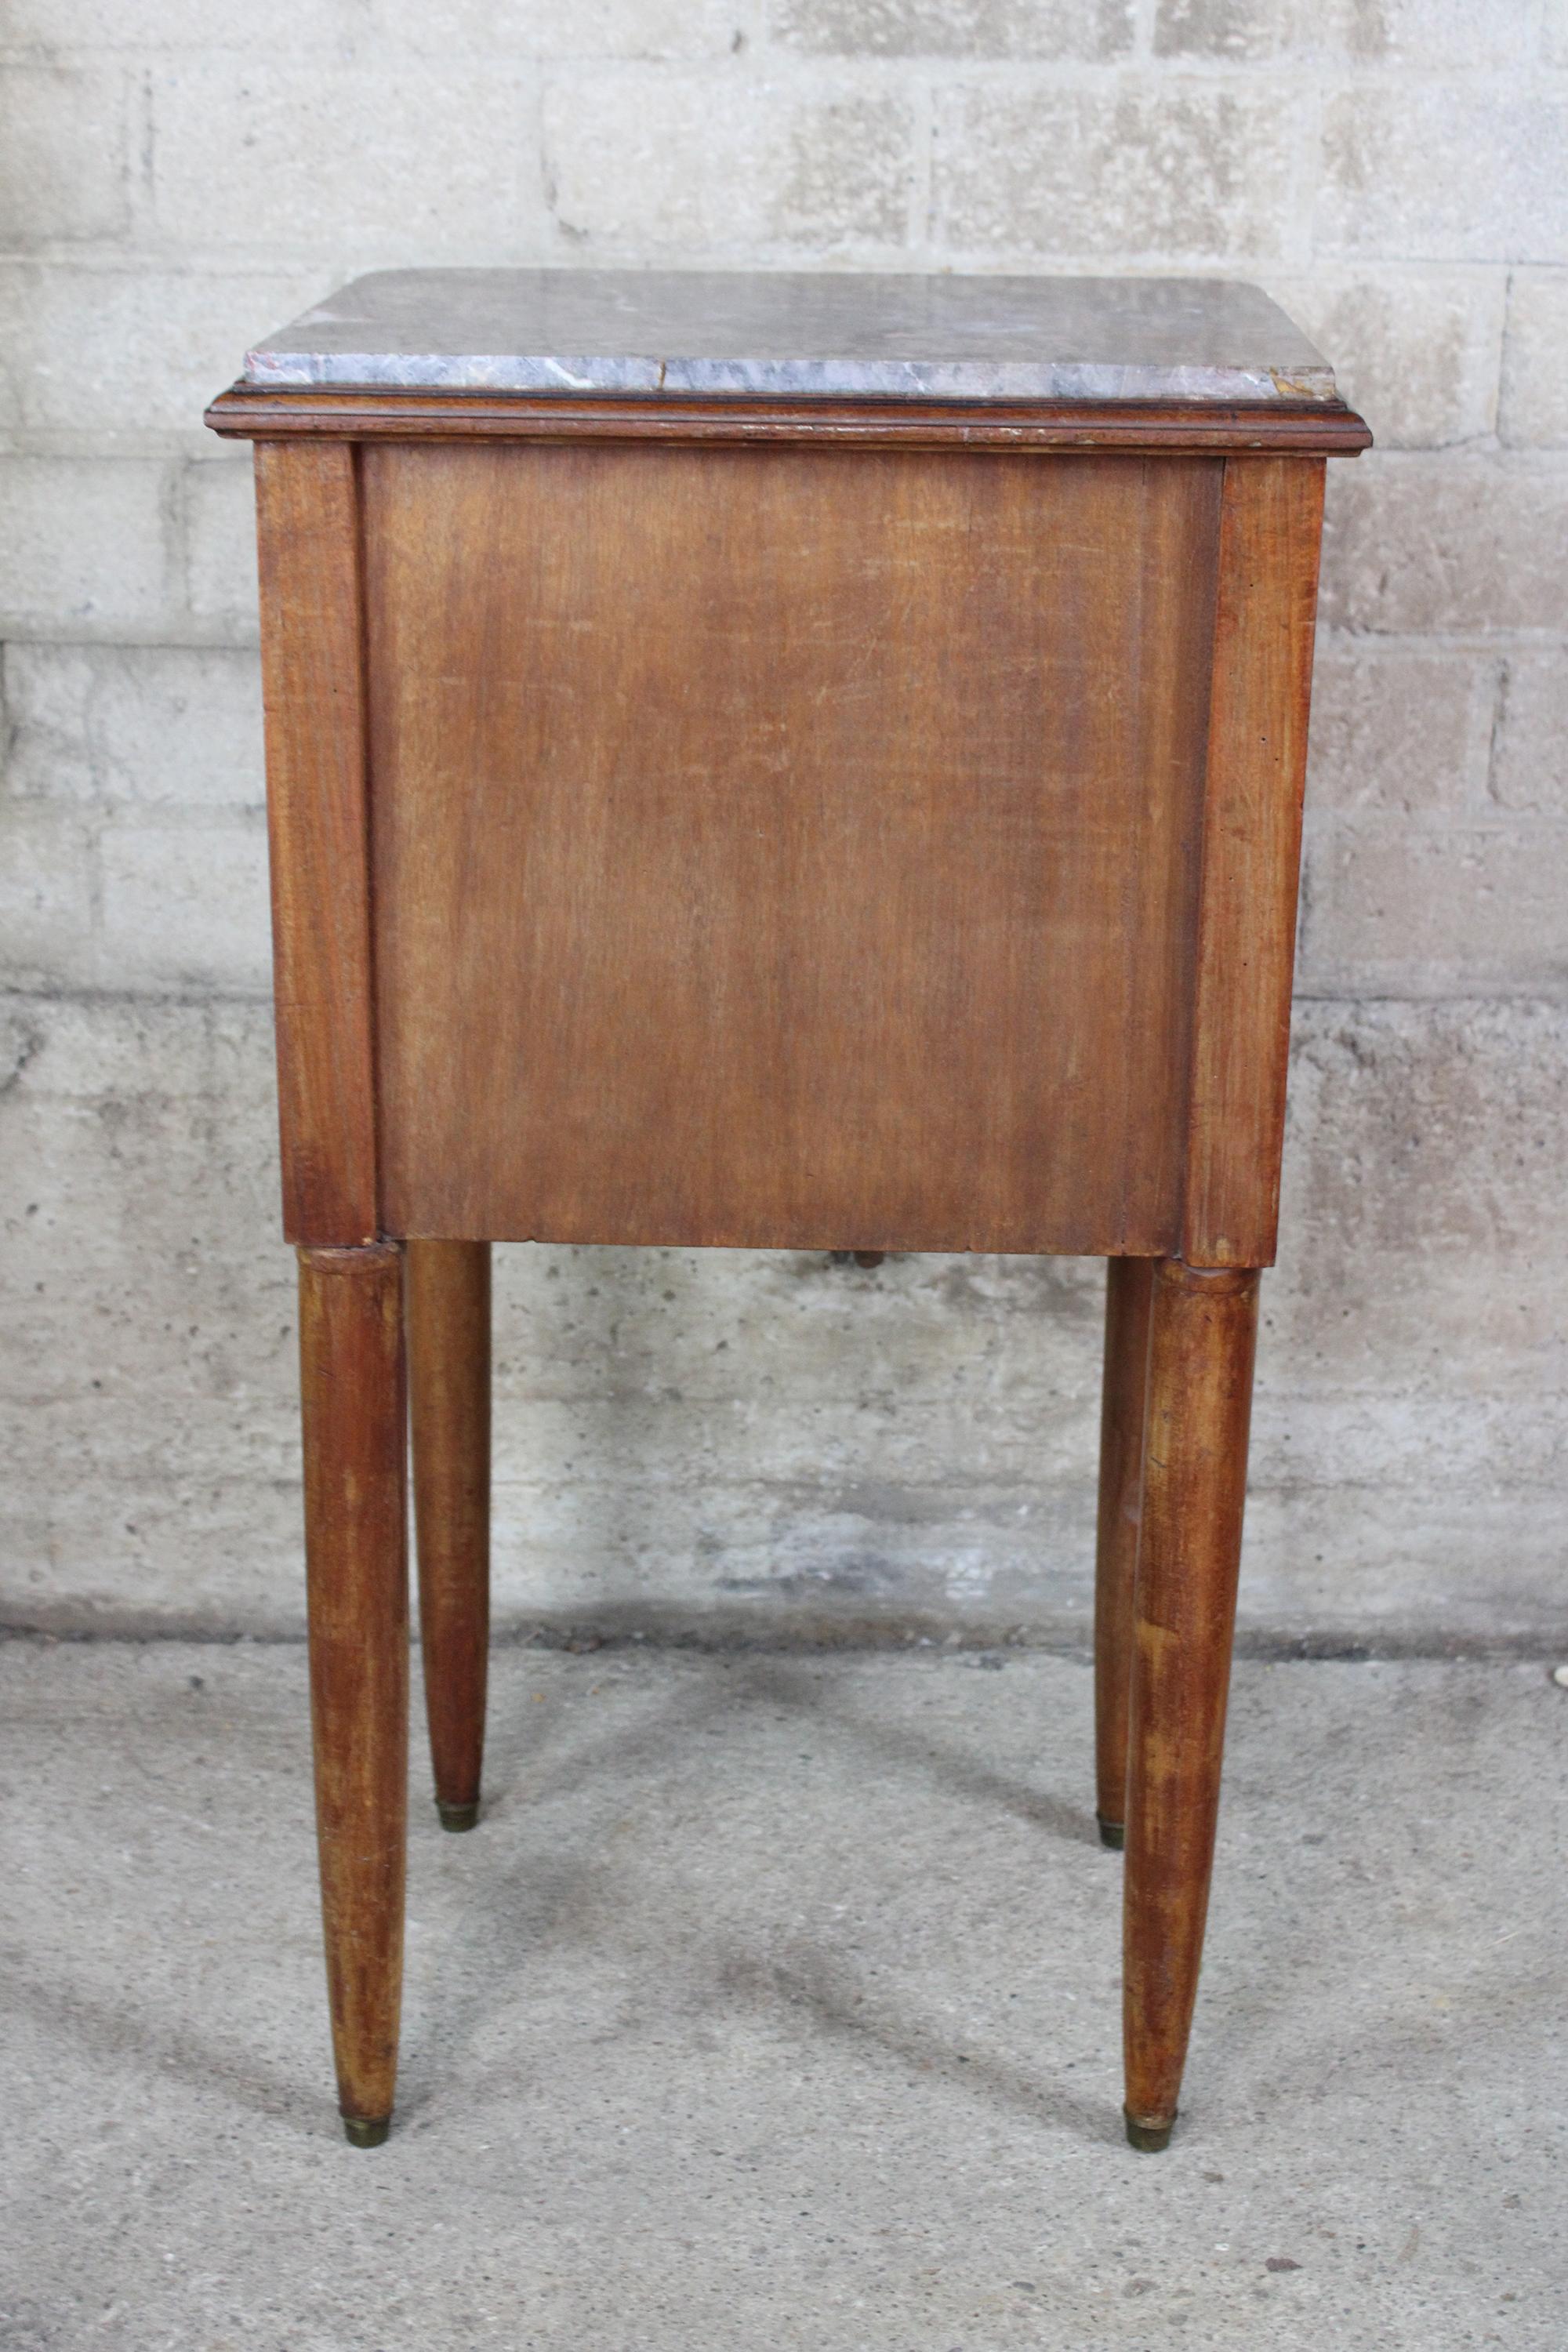 Antique French Walnut Marble Top Tobacco Humidor Stand Cabinet End Table 2